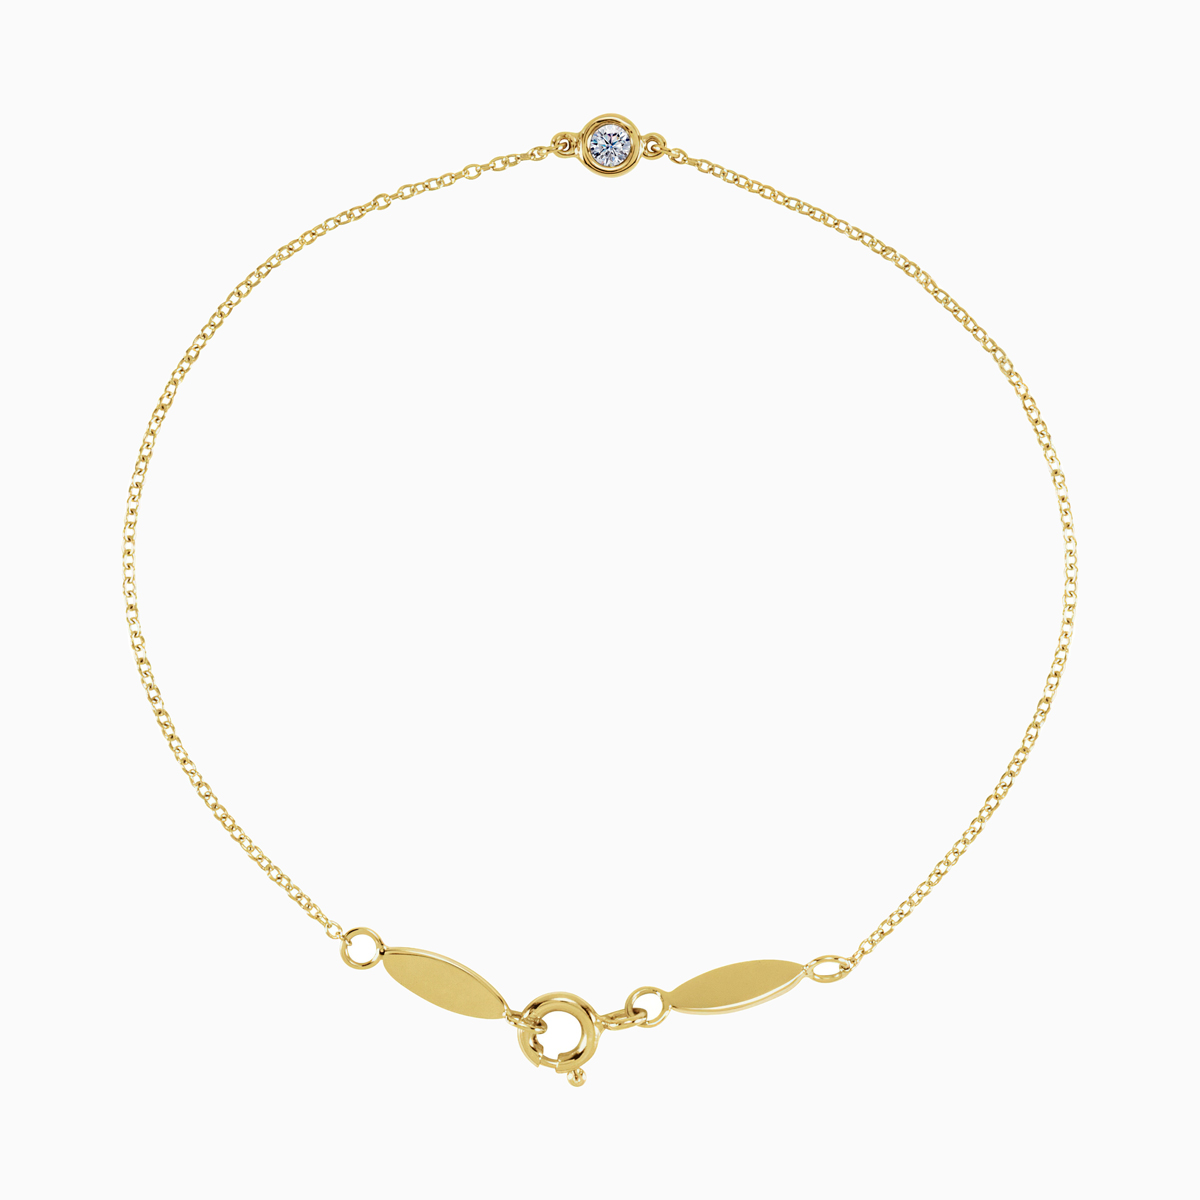 Natural Diamond Accented Link Bracelet with Flap Motifs, 14k Gold